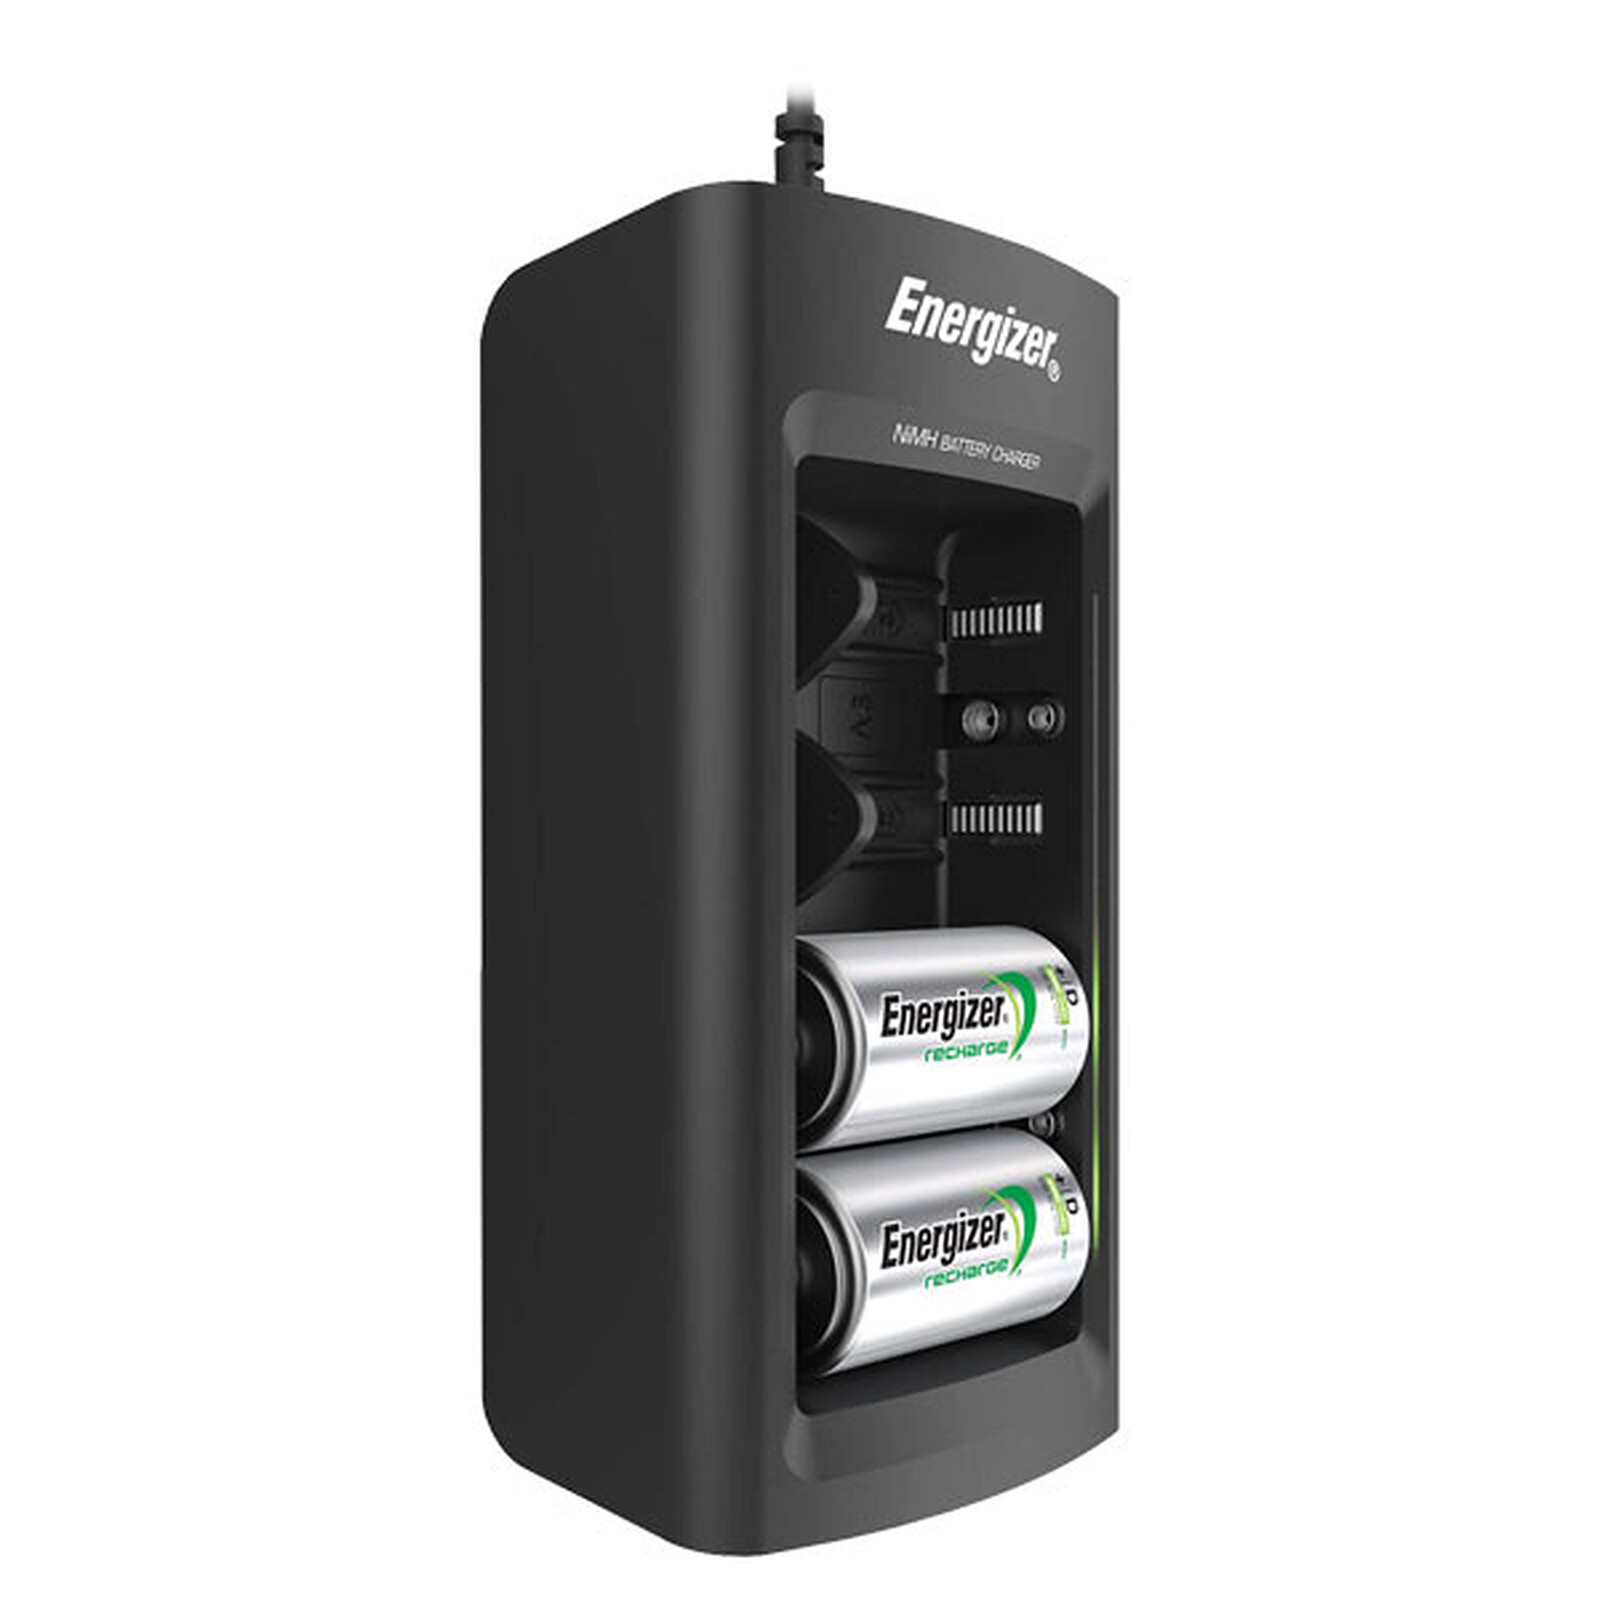 Chargeurs d'accus 12V universel - Photo & Video